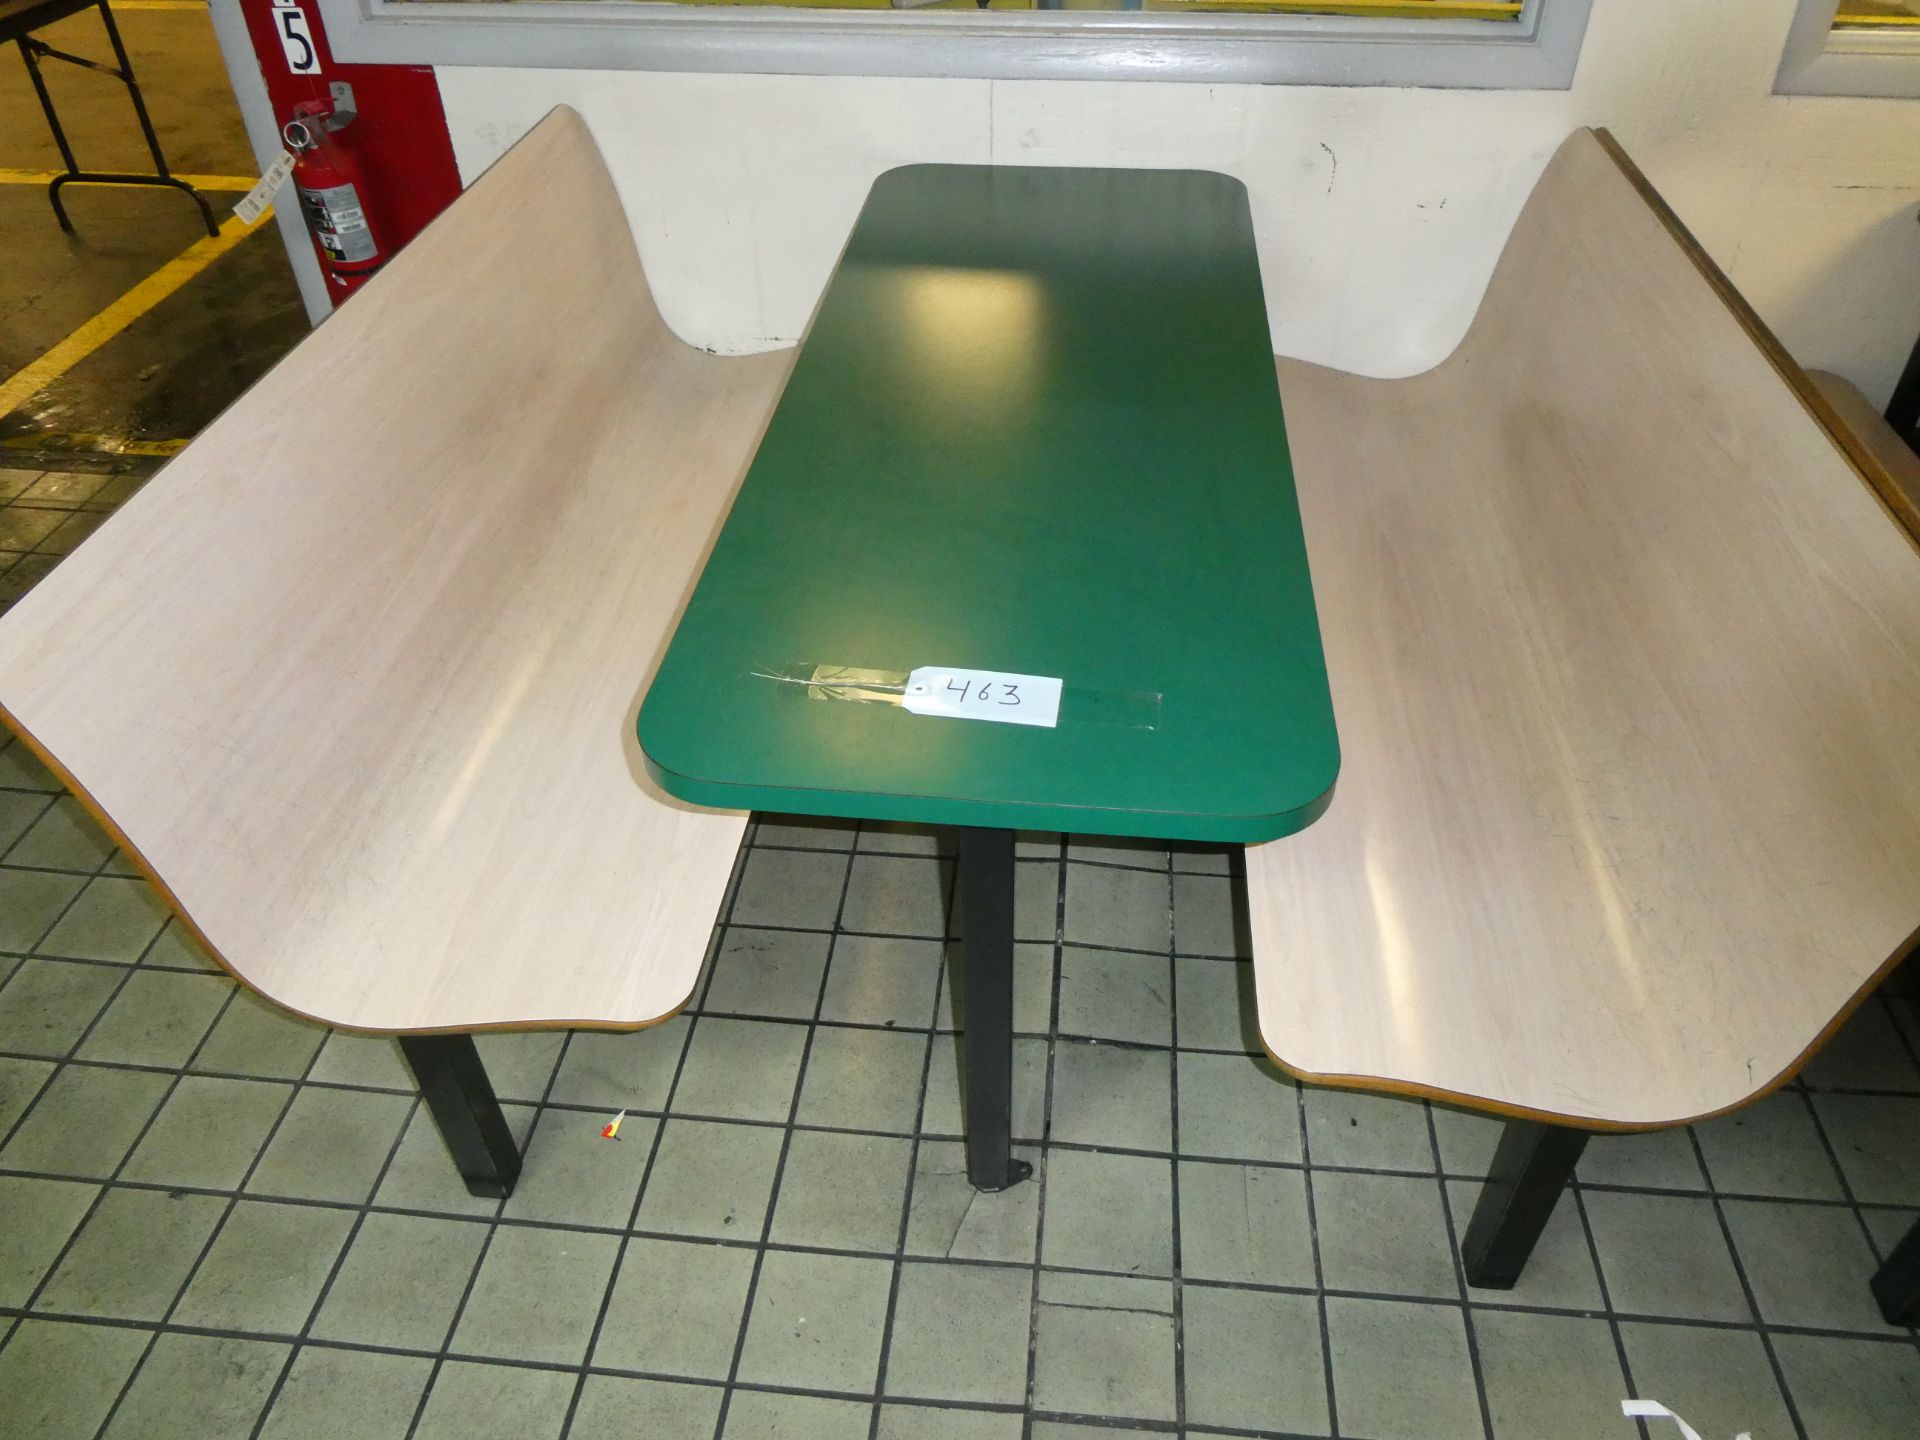 Table w/ Benches